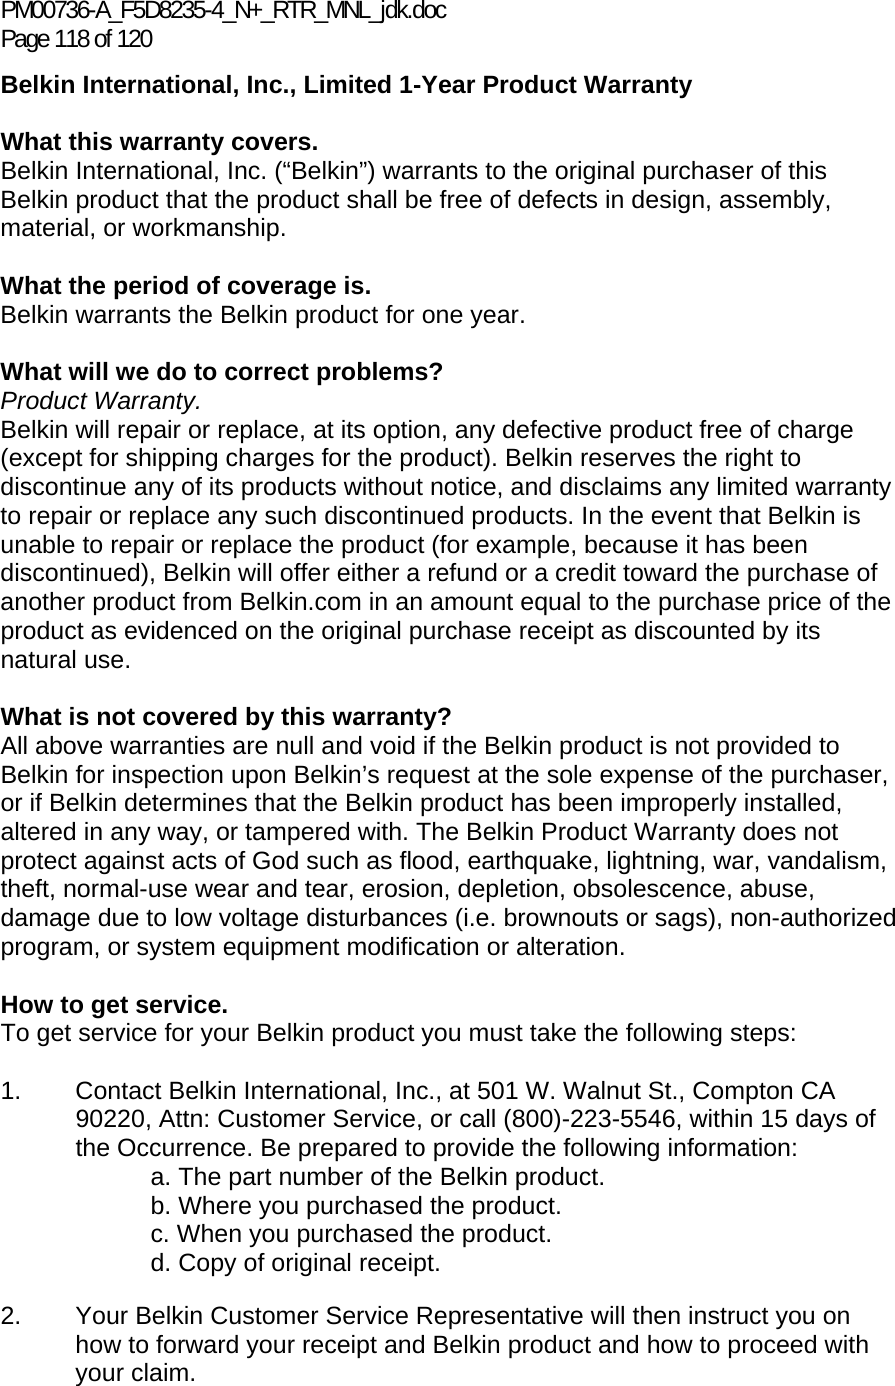 PM00736-A_F5D8235-4_N+_RTR_MNL_jdk.doc Page 118 of 120 Belkin International, Inc., Limited 1-Year Product Warranty  What this warranty covers. Belkin International, Inc. (“Belkin”) warrants to the original purchaser of this Belkin product that the product shall be free of defects in design, assembly, material, or workmanship.   What the period of coverage is. Belkin warrants the Belkin product for one year.  What will we do to correct problems?  Product Warranty. Belkin will repair or replace, at its option, any defective product free of charge (except for shipping charges for the product). Belkin reserves the right to discontinue any of its products without notice, and disclaims any limited warranty to repair or replace any such discontinued products. In the event that Belkin is unable to repair or replace the product (for example, because it has been discontinued), Belkin will offer either a refund or a credit toward the purchase of another product from Belkin.com in an amount equal to the purchase price of the product as evidenced on the original purchase receipt as discounted by its natural use.    What is not covered by this warranty? All above warranties are null and void if the Belkin product is not provided to Belkin for inspection upon Belkin’s request at the sole expense of the purchaser, or if Belkin determines that the Belkin product has been improperly installed, altered in any way, or tampered with. The Belkin Product Warranty does not protect against acts of God such as flood, earthquake, lightning, war, vandalism, theft, normal-use wear and tear, erosion, depletion, obsolescence, abuse, damage due to low voltage disturbances (i.e. brownouts or sags), non-authorized program, or system equipment modification or alteration.  How to get service.    To get service for your Belkin product you must take the following steps:  1.  Contact Belkin International, Inc., at 501 W. Walnut St., Compton CA 90220, Attn: Customer Service, or call (800)-223-5546, within 15 days of the Occurrence. Be prepared to provide the following information: a. The part number of the Belkin product. b. Where you purchased the product. c. When you purchased the product. d. Copy of original receipt.  2.  Your Belkin Customer Service Representative will then instruct you on how to forward your receipt and Belkin product and how to proceed with your claim.  